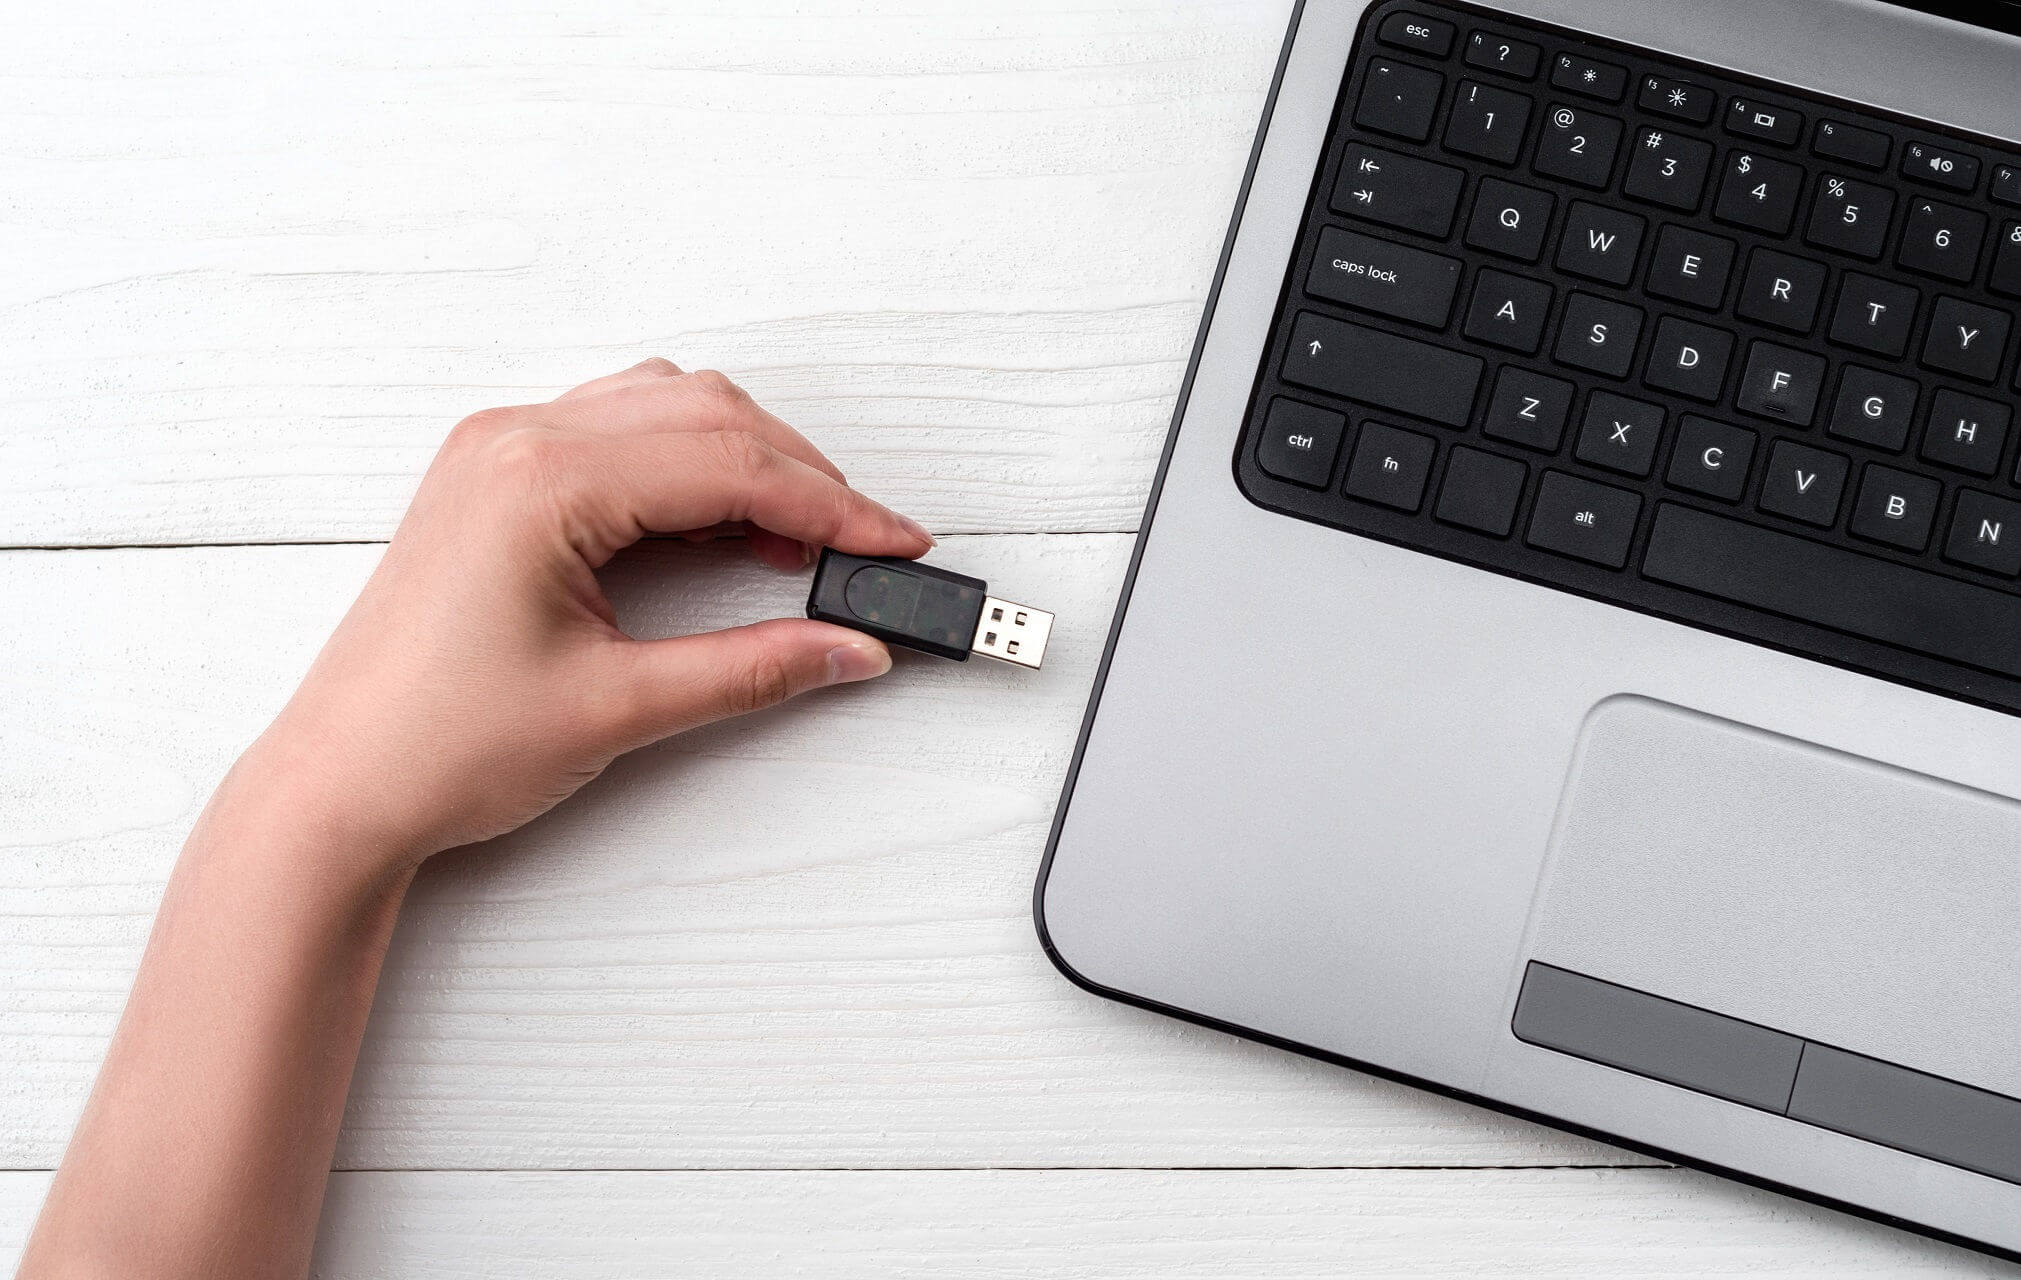 Recovering deleted files from USB flash drives